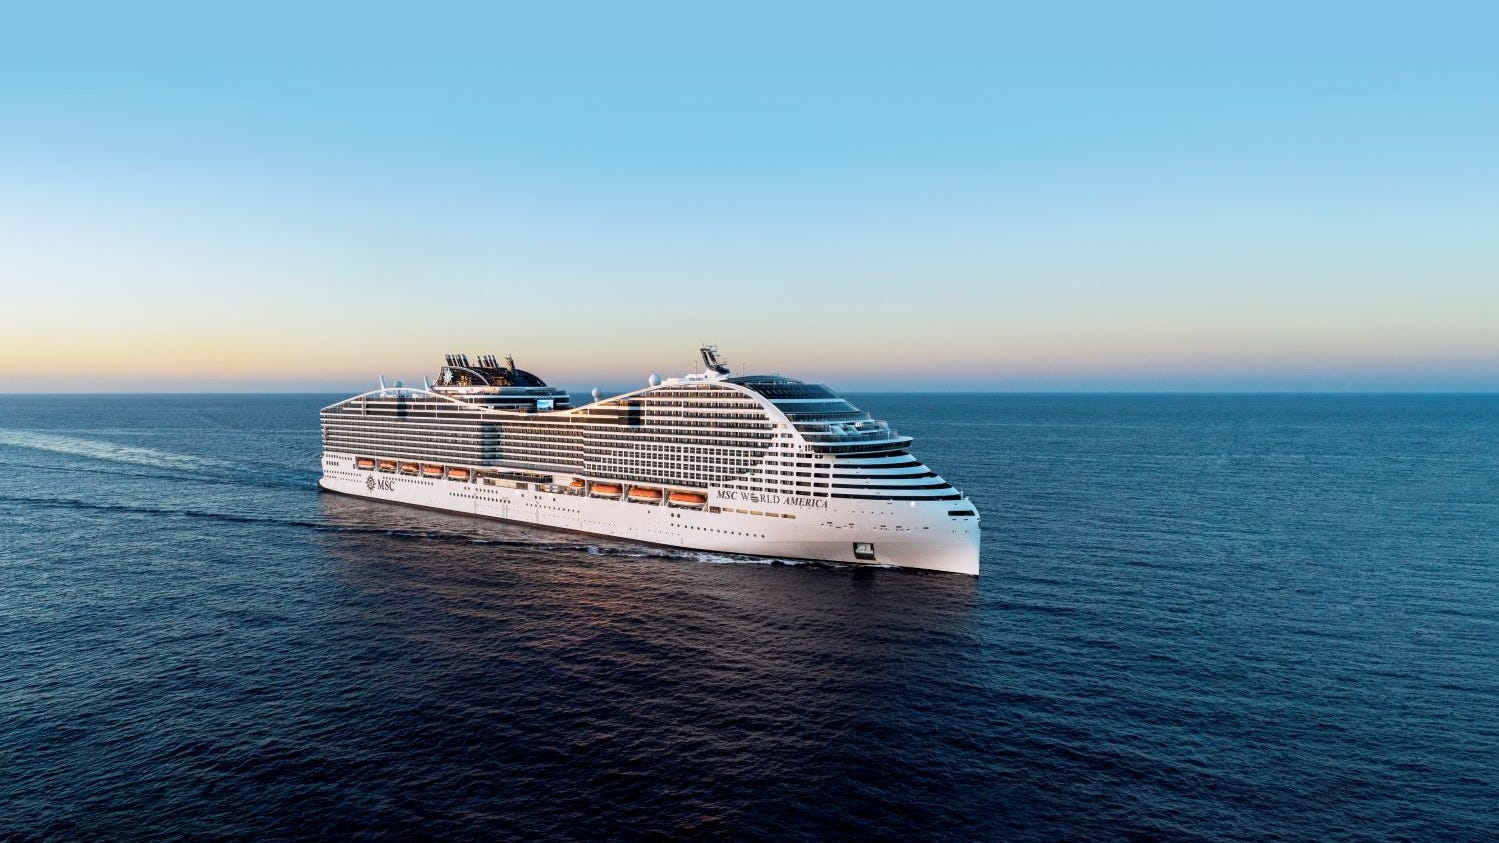 MSC Cruises is growing its footprint in the U.S. Here's why